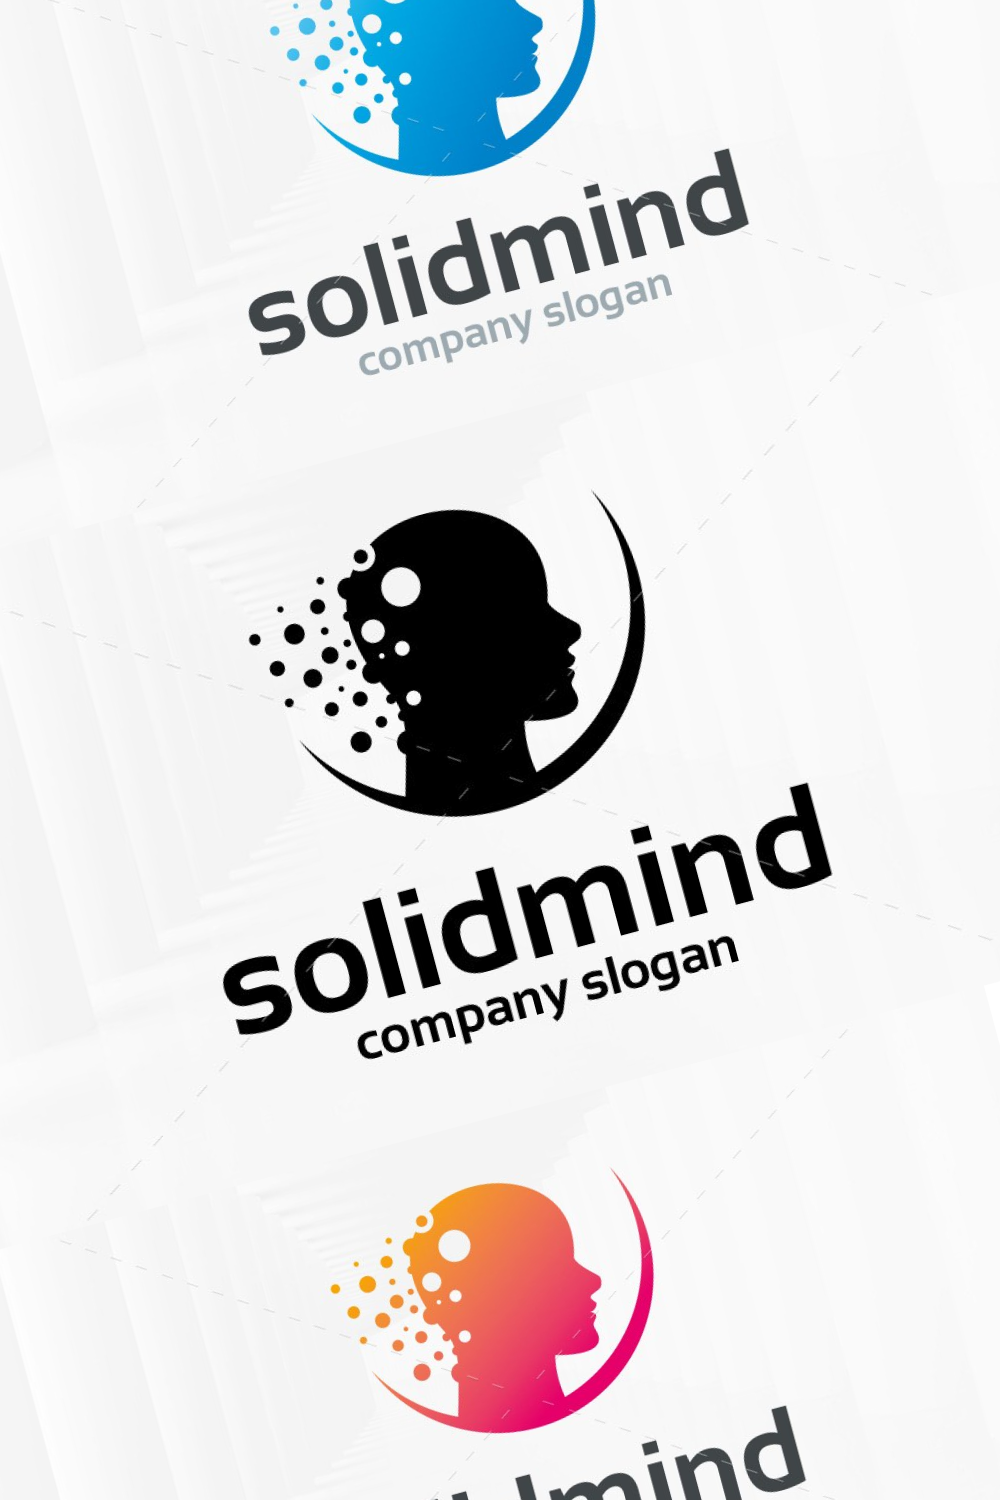 Interesting logos for your work.